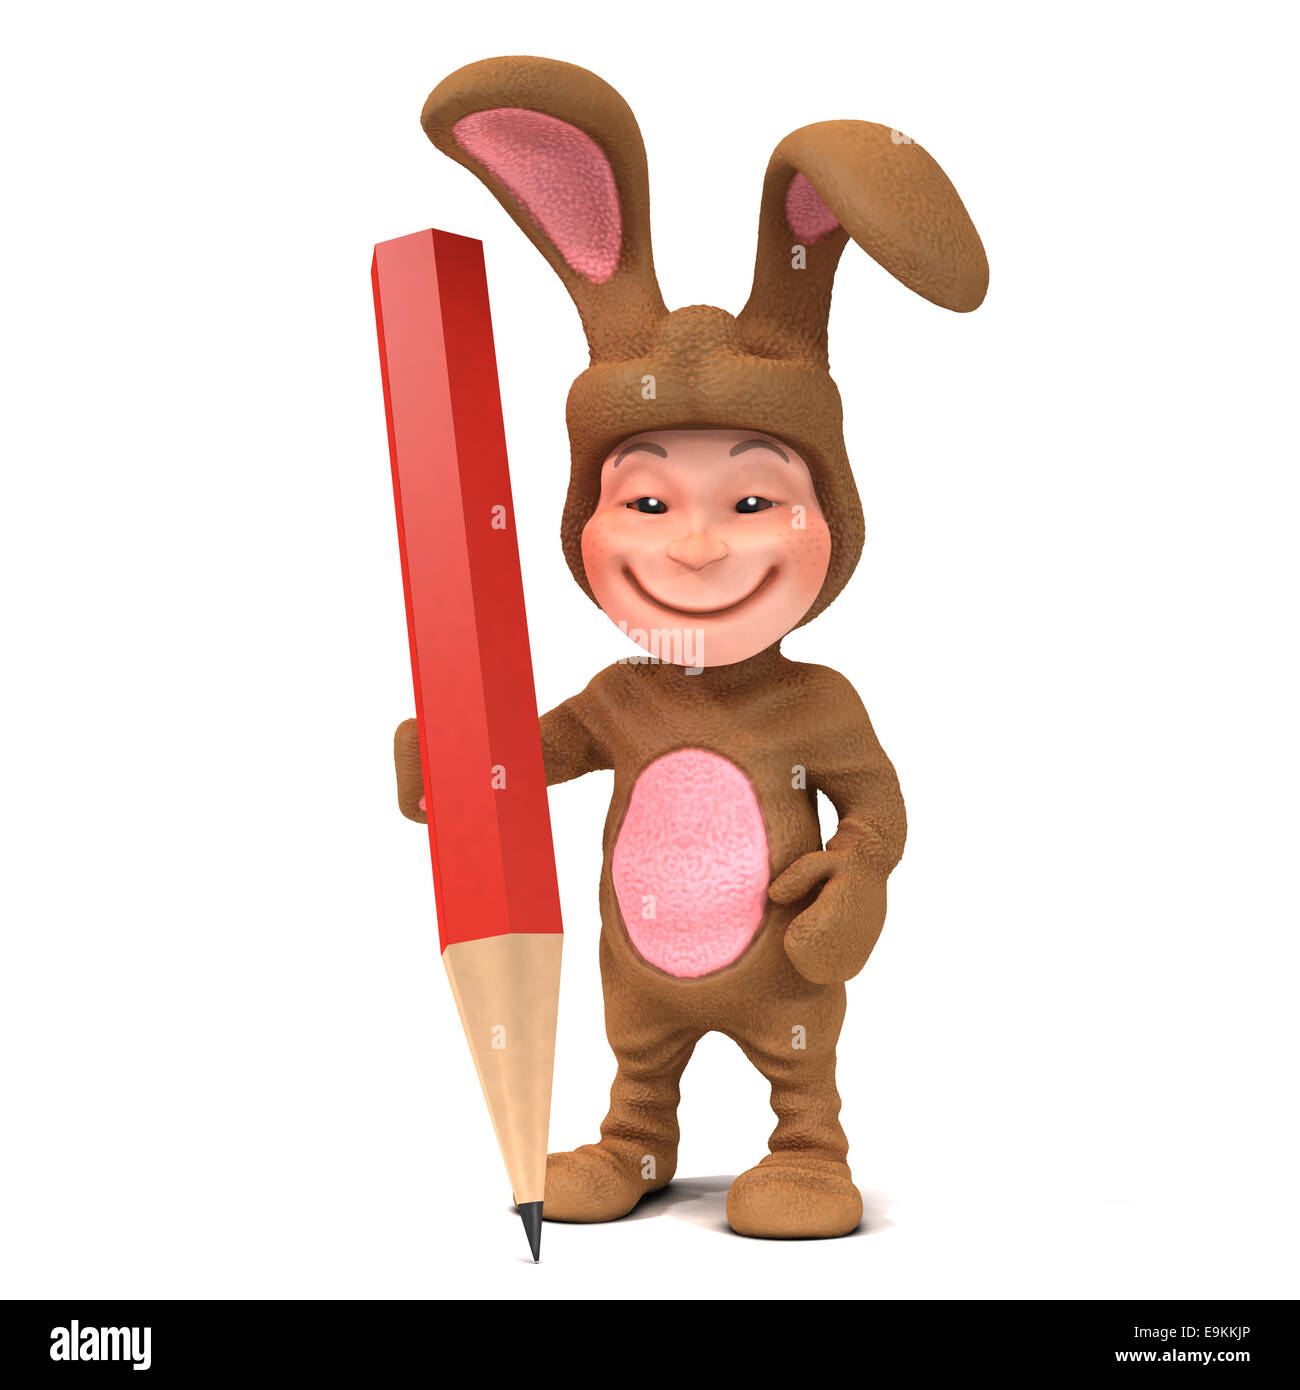 3d render of a child wearing a bunny rabbit costume holding a pencil Stock Photo